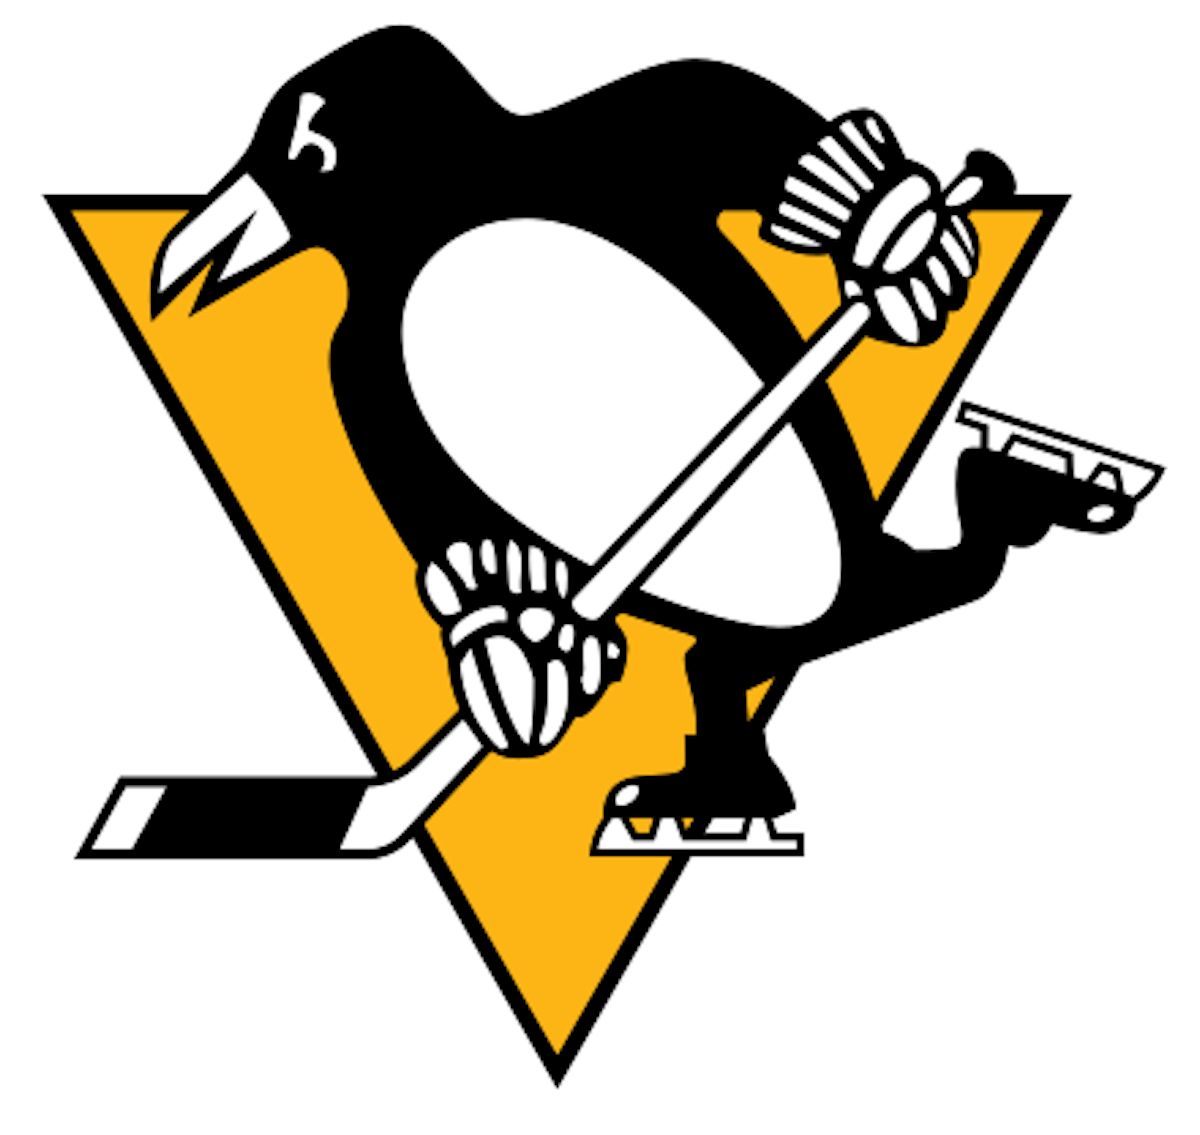 Boston Red Sox Owner Fenway Sports in Talks to Buy Pittsburgh Penguins - WSJ